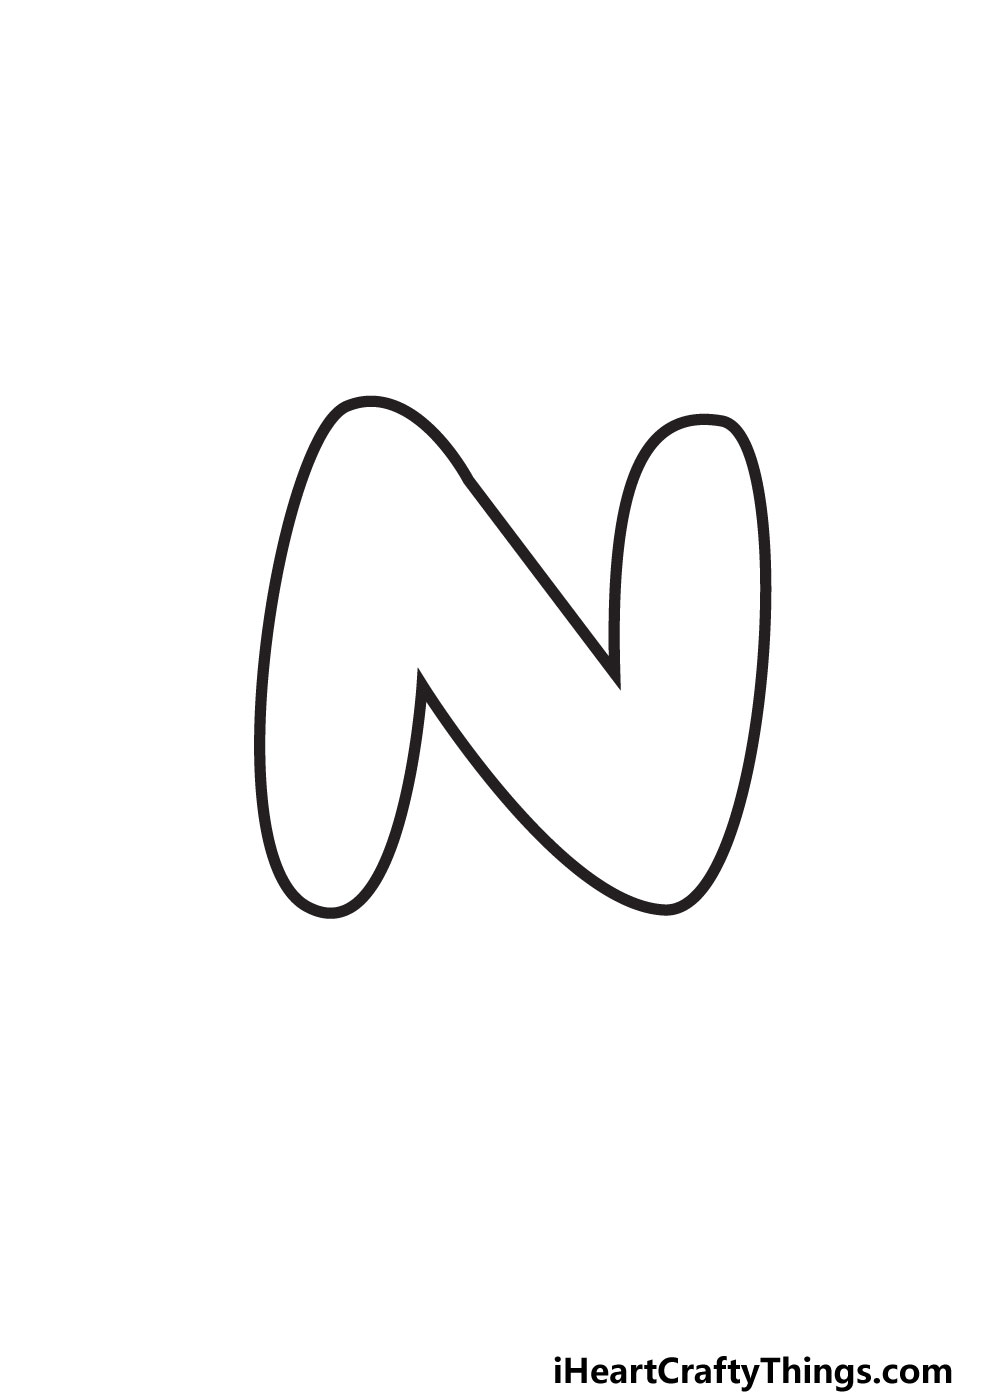 Bubble letter n draw your own bubble n in easy steps